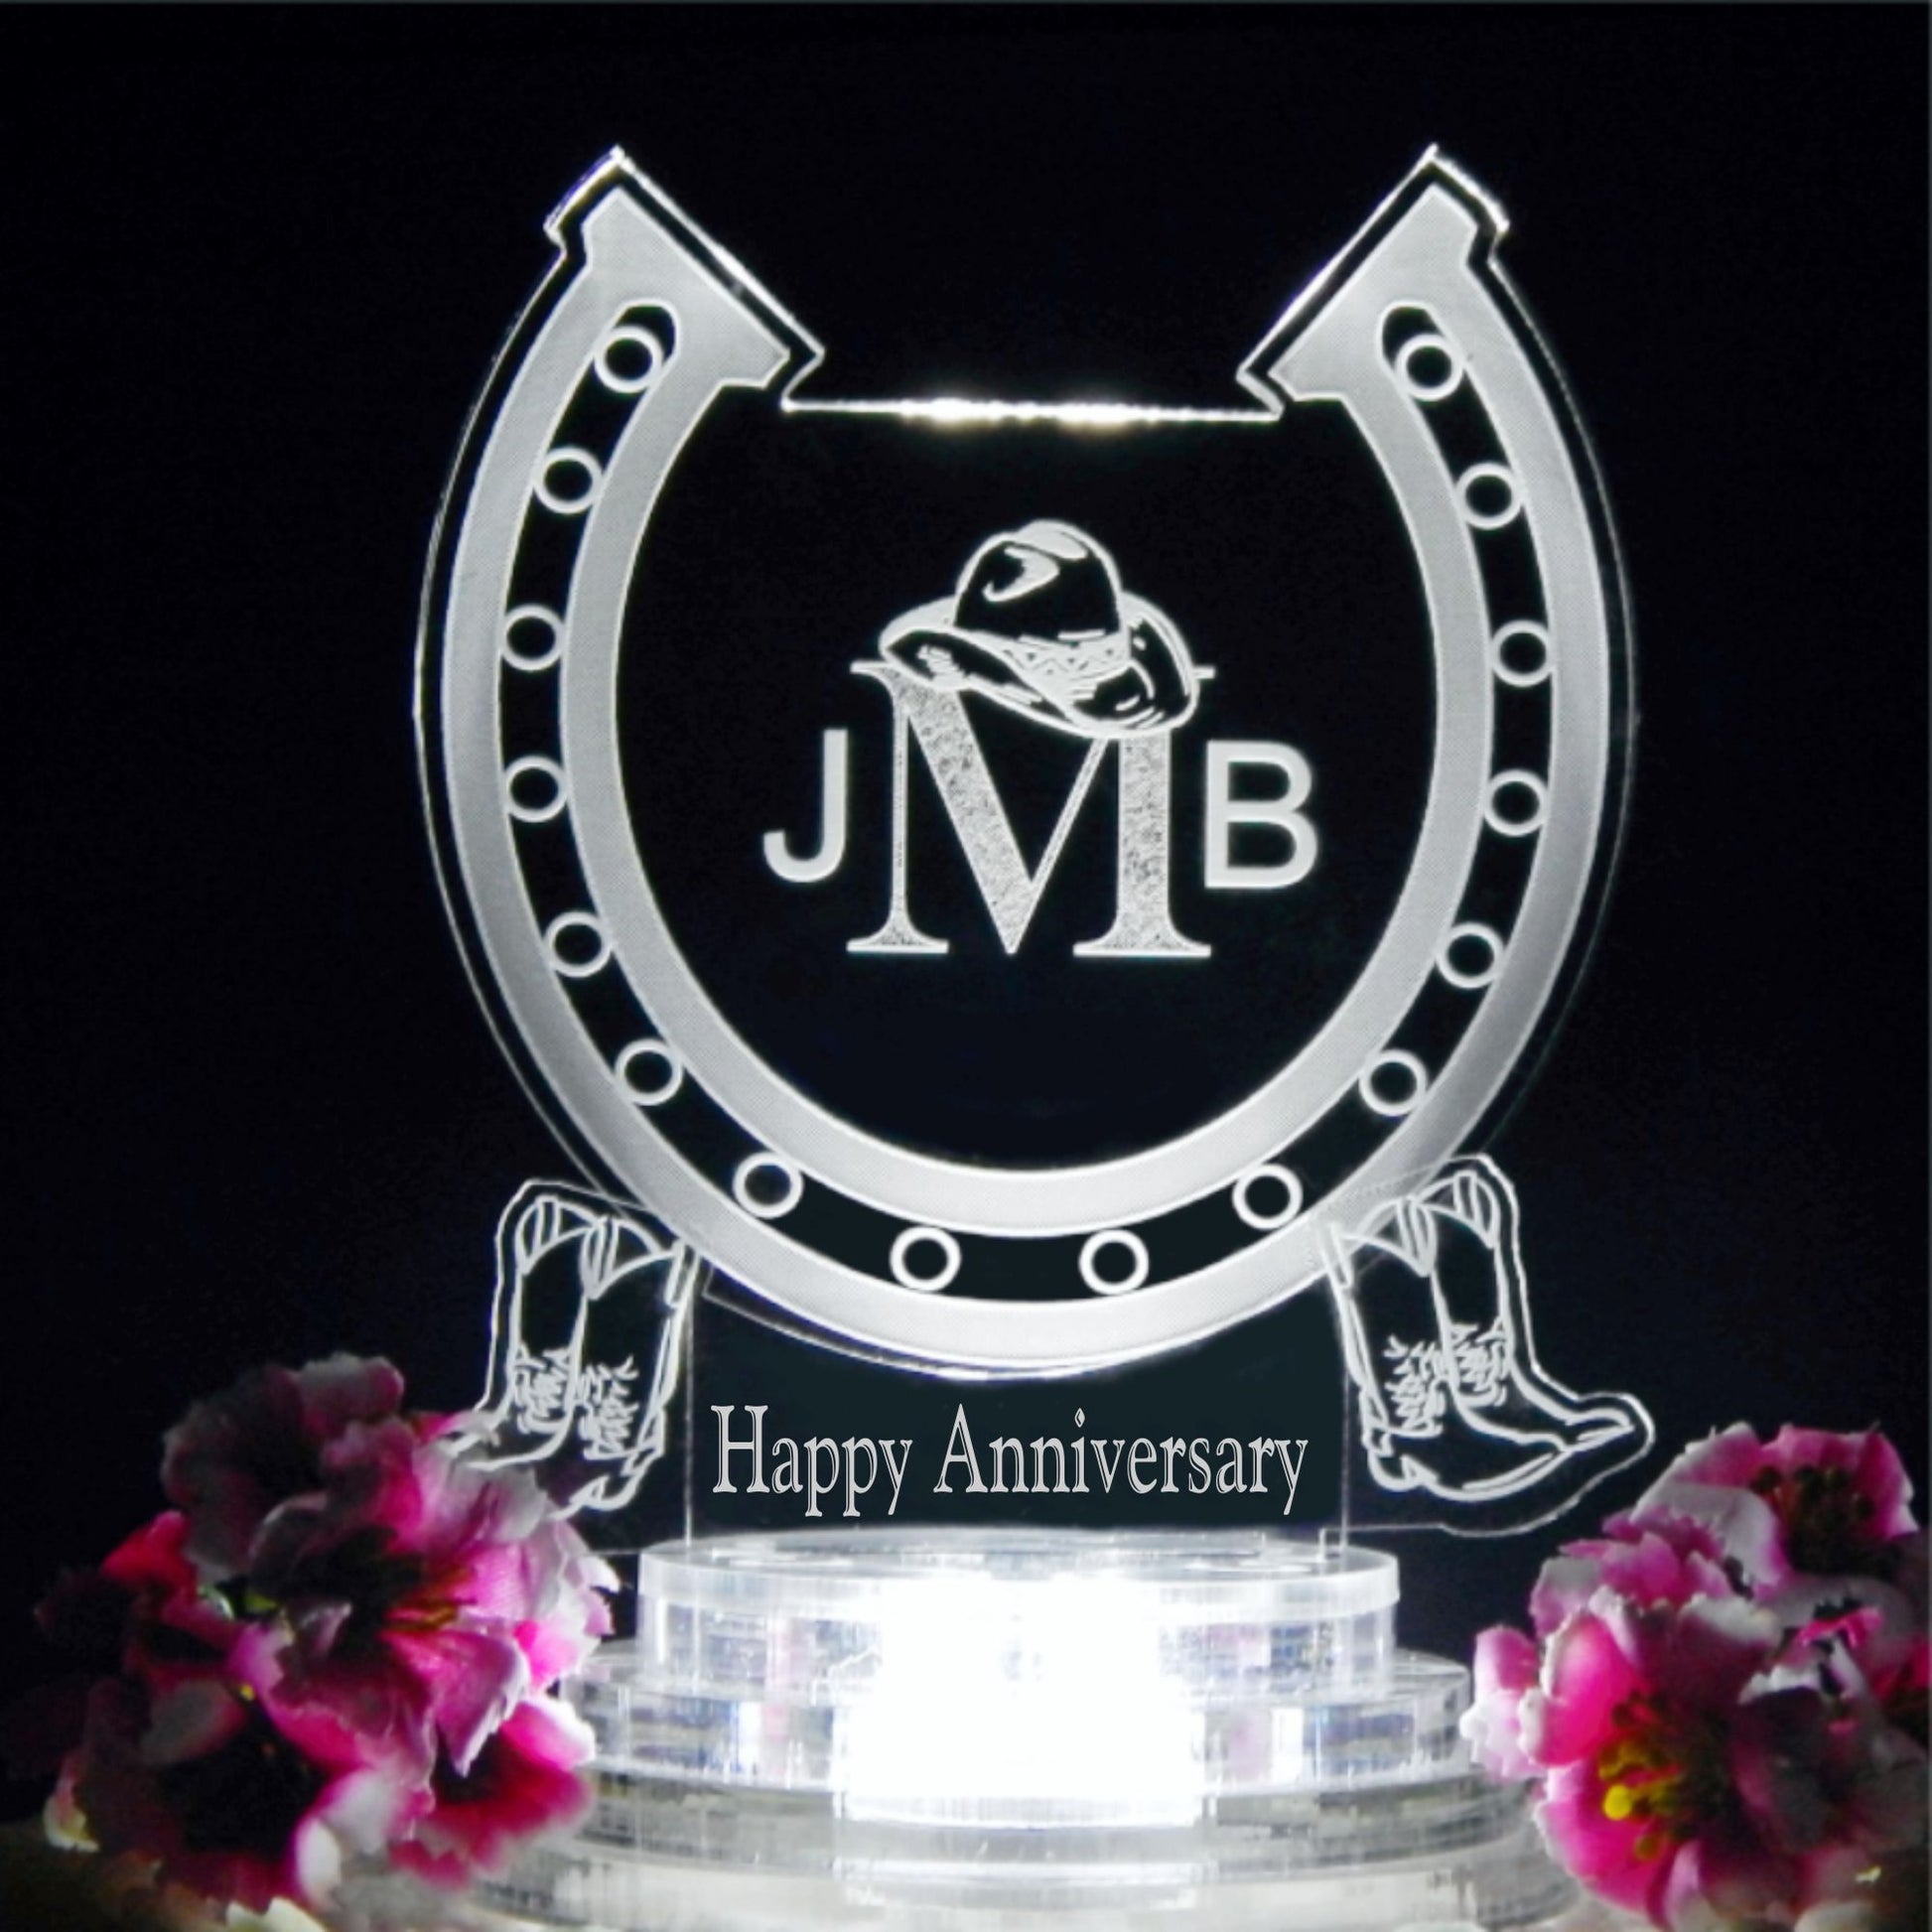 horseshoe shaped acrylic cake topper designed with a horseshoe design and engraved with monogram and Happy Anniversary